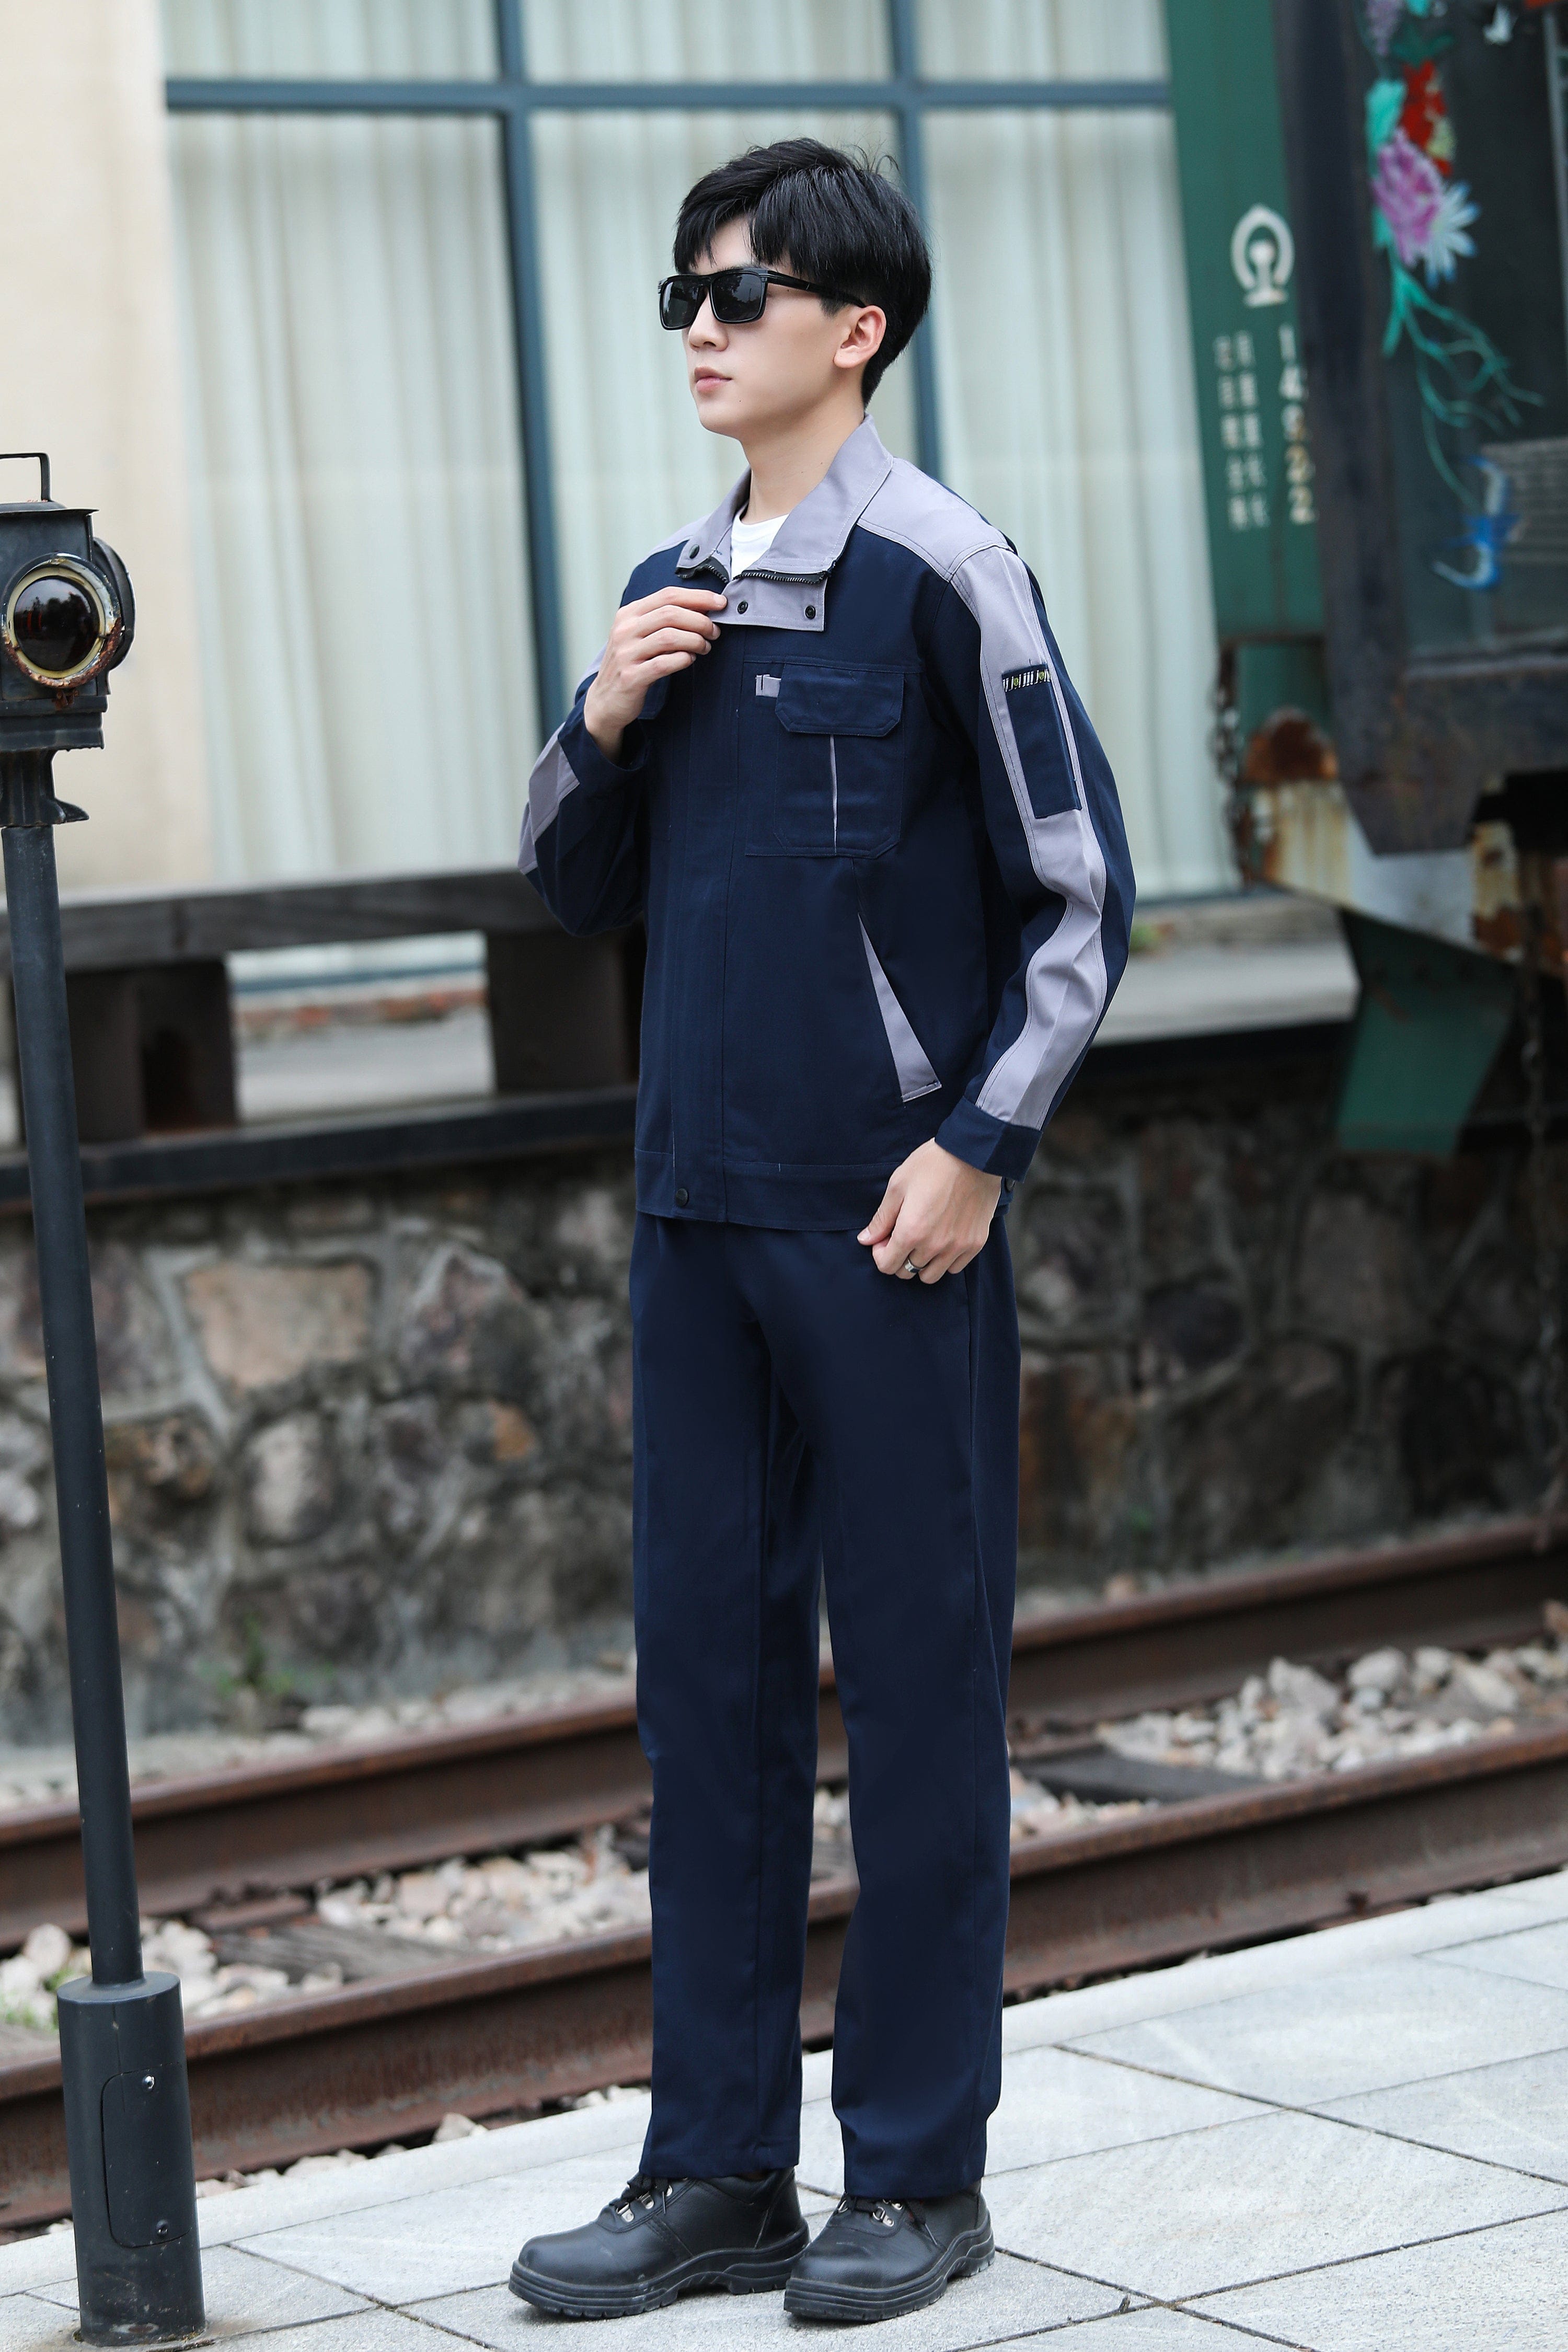 Corals Trading Co. 可樂思百貨商行 纯棉 Autumn and winter long-sleeved pure cotton series workwear SD-PC-W804